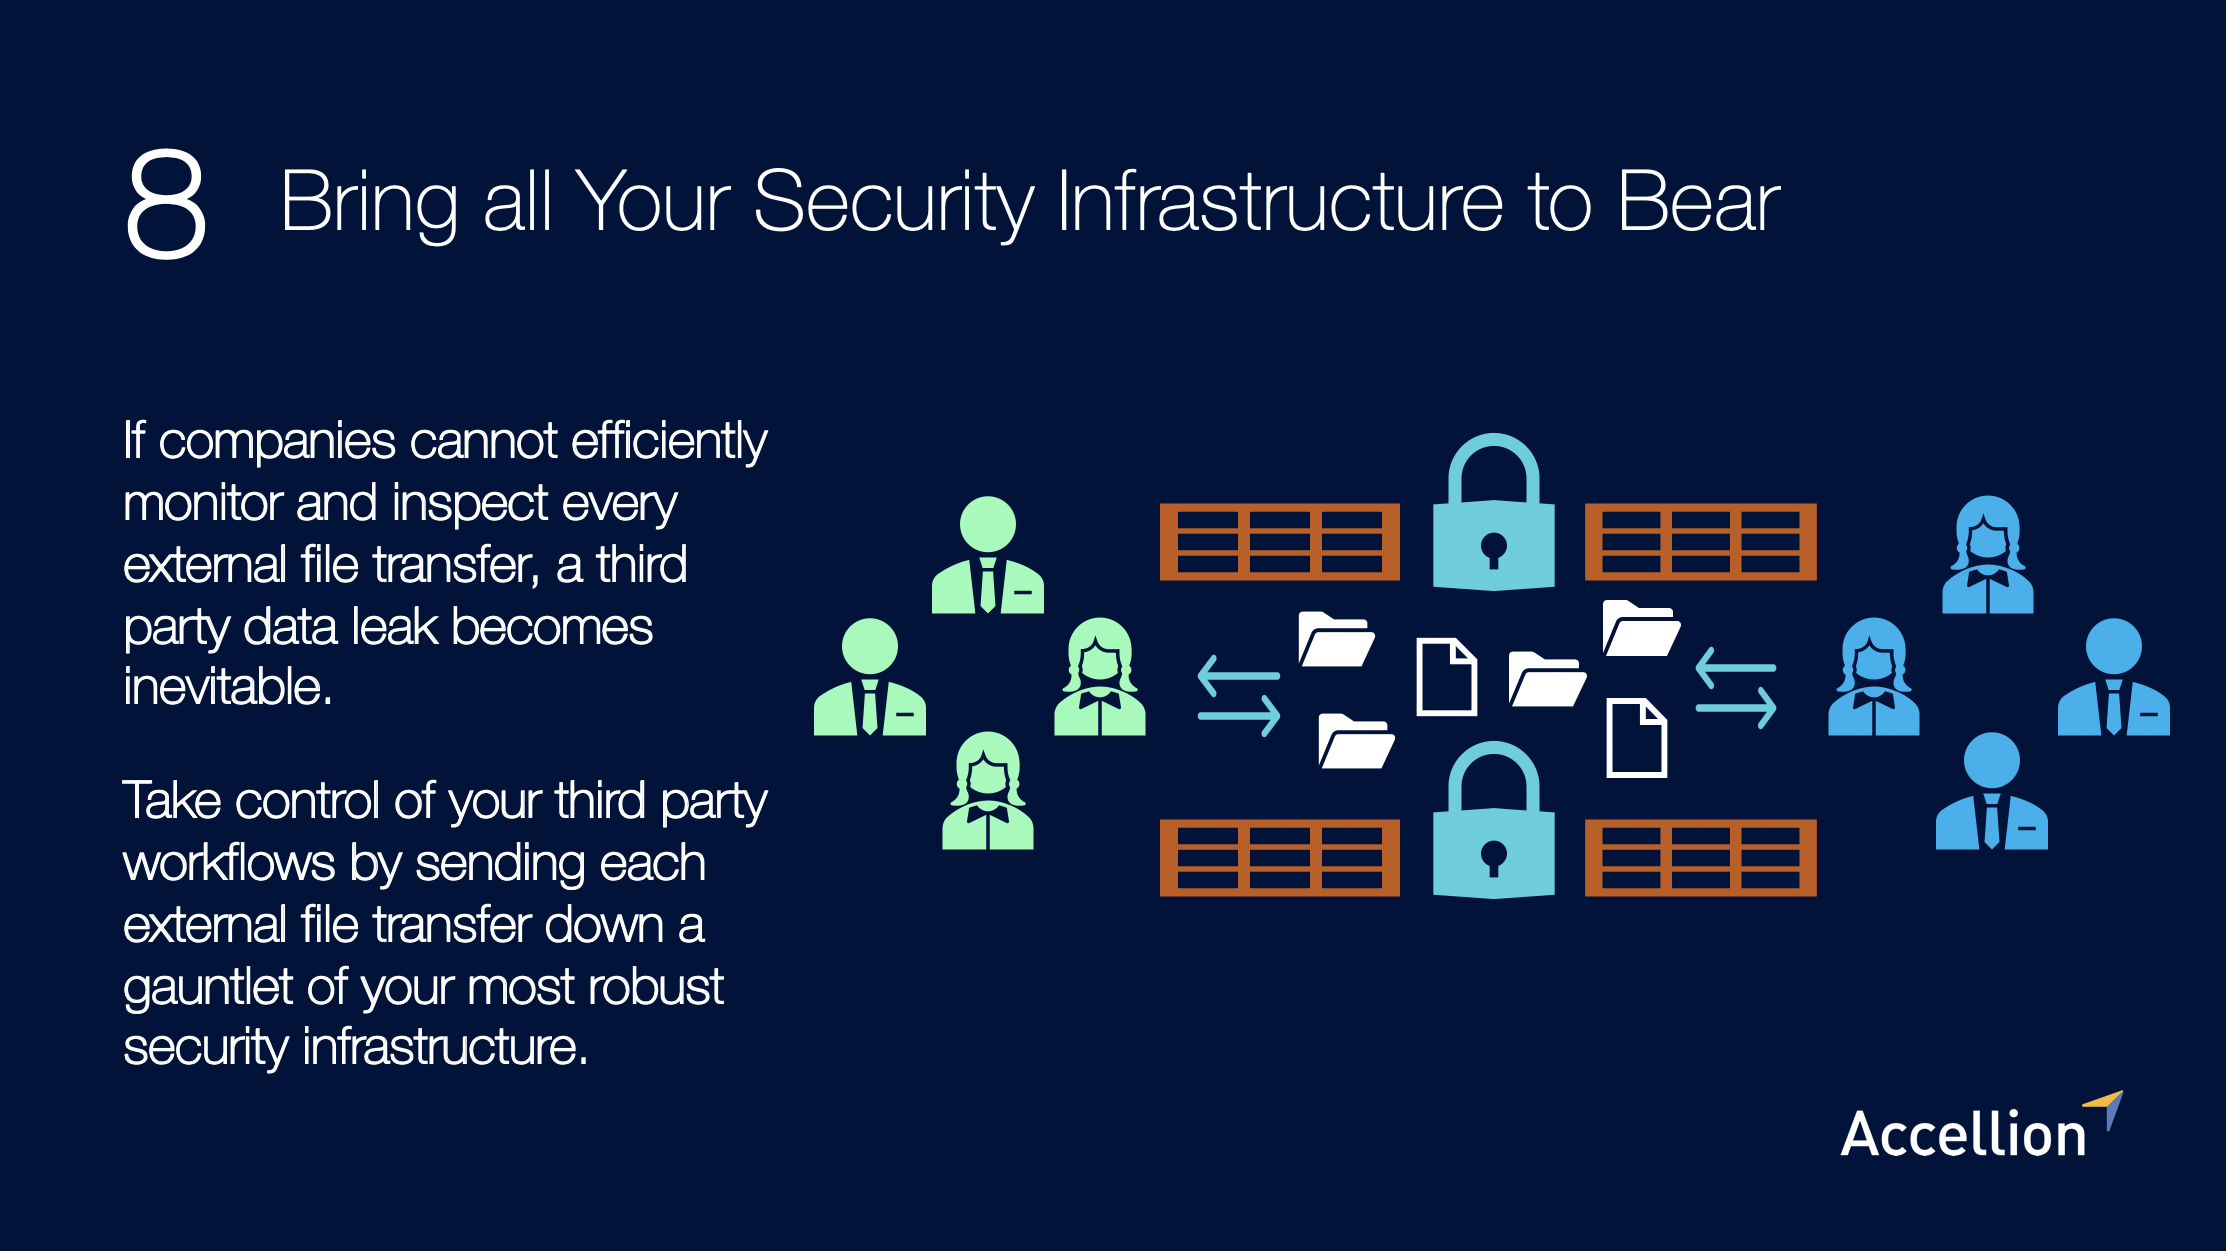 Bring All Your Security Infrastructure to Bear